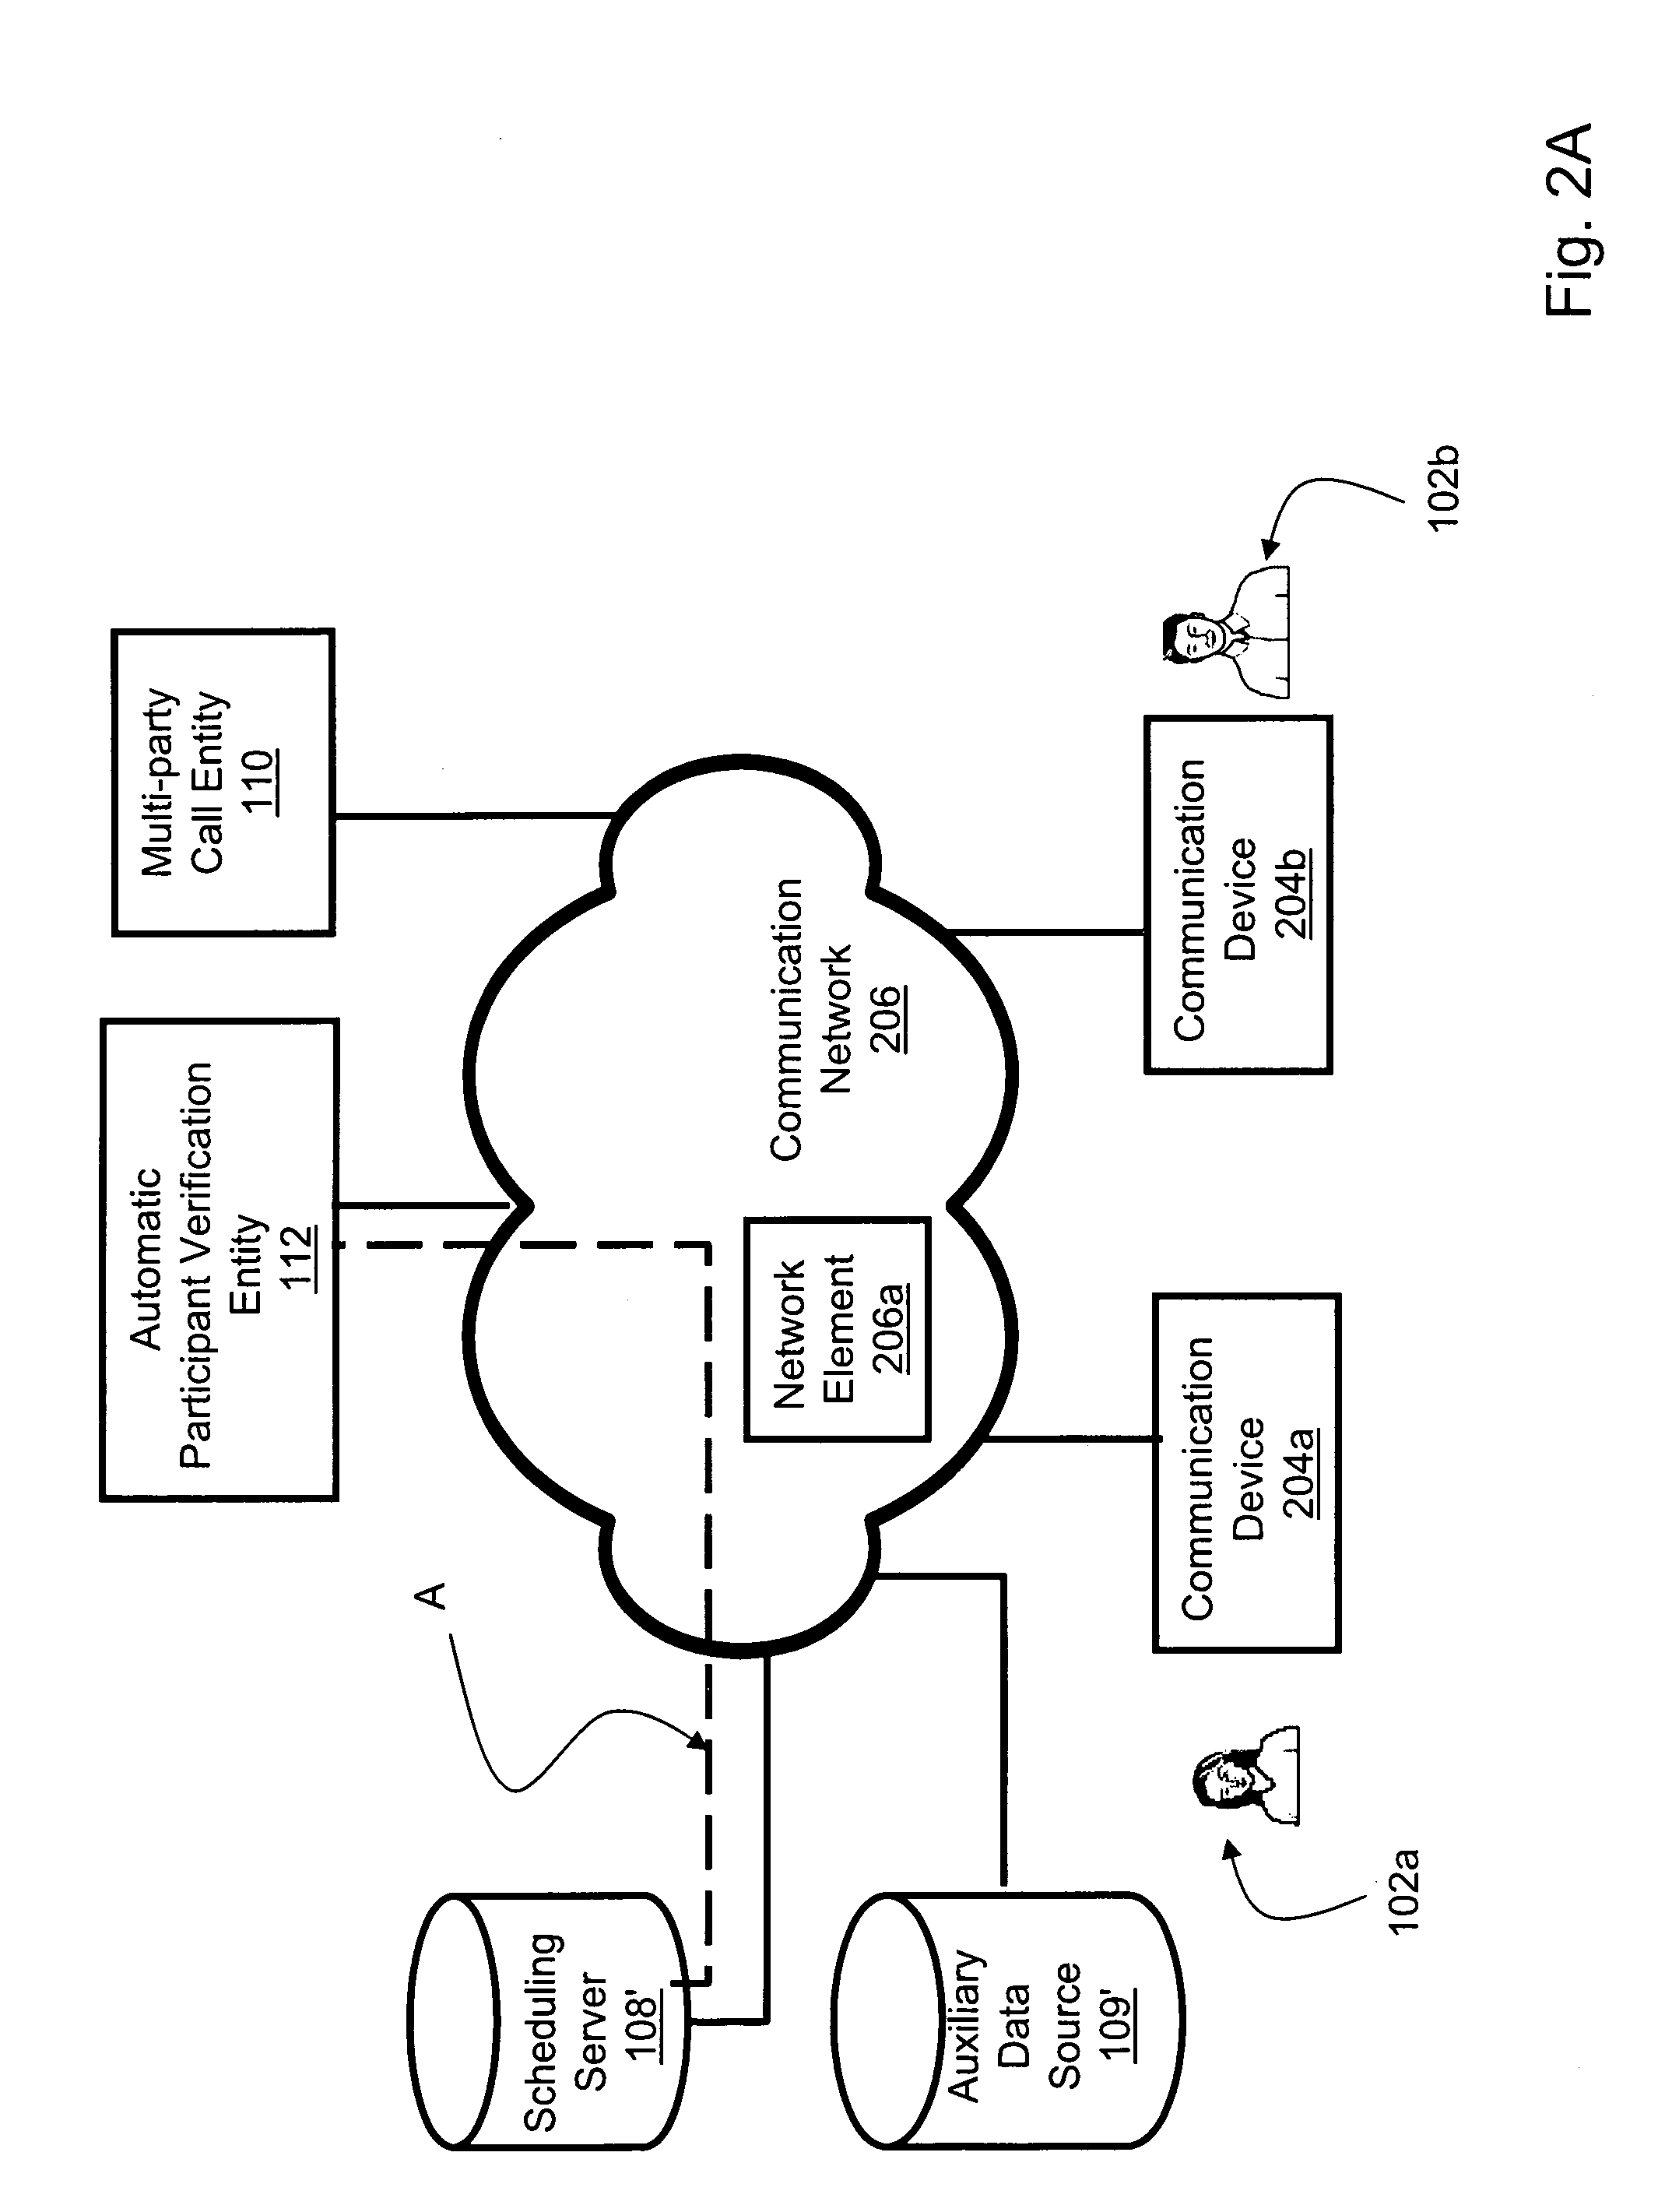 Method, system and apparatus for participant verification in a multi-party call environment